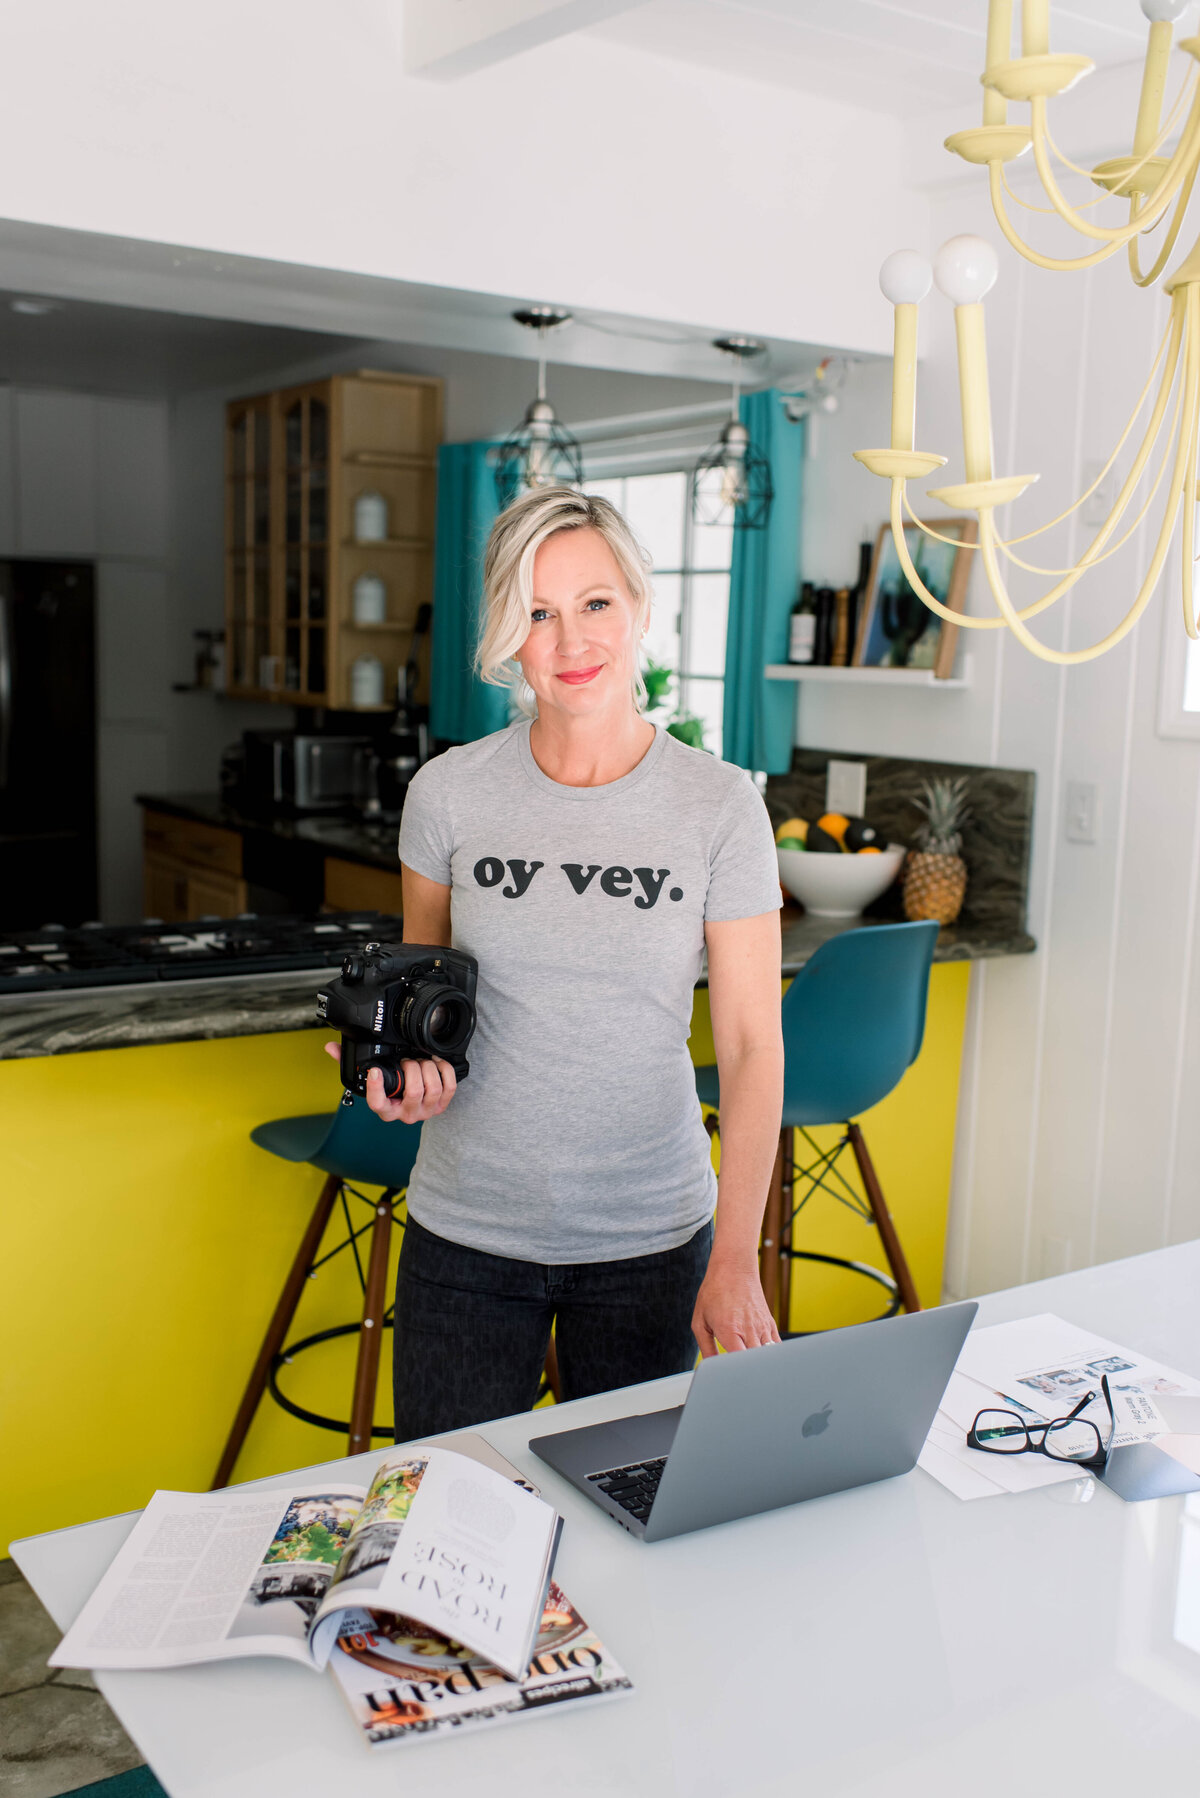 brand photography for los angeles entrepreneurs